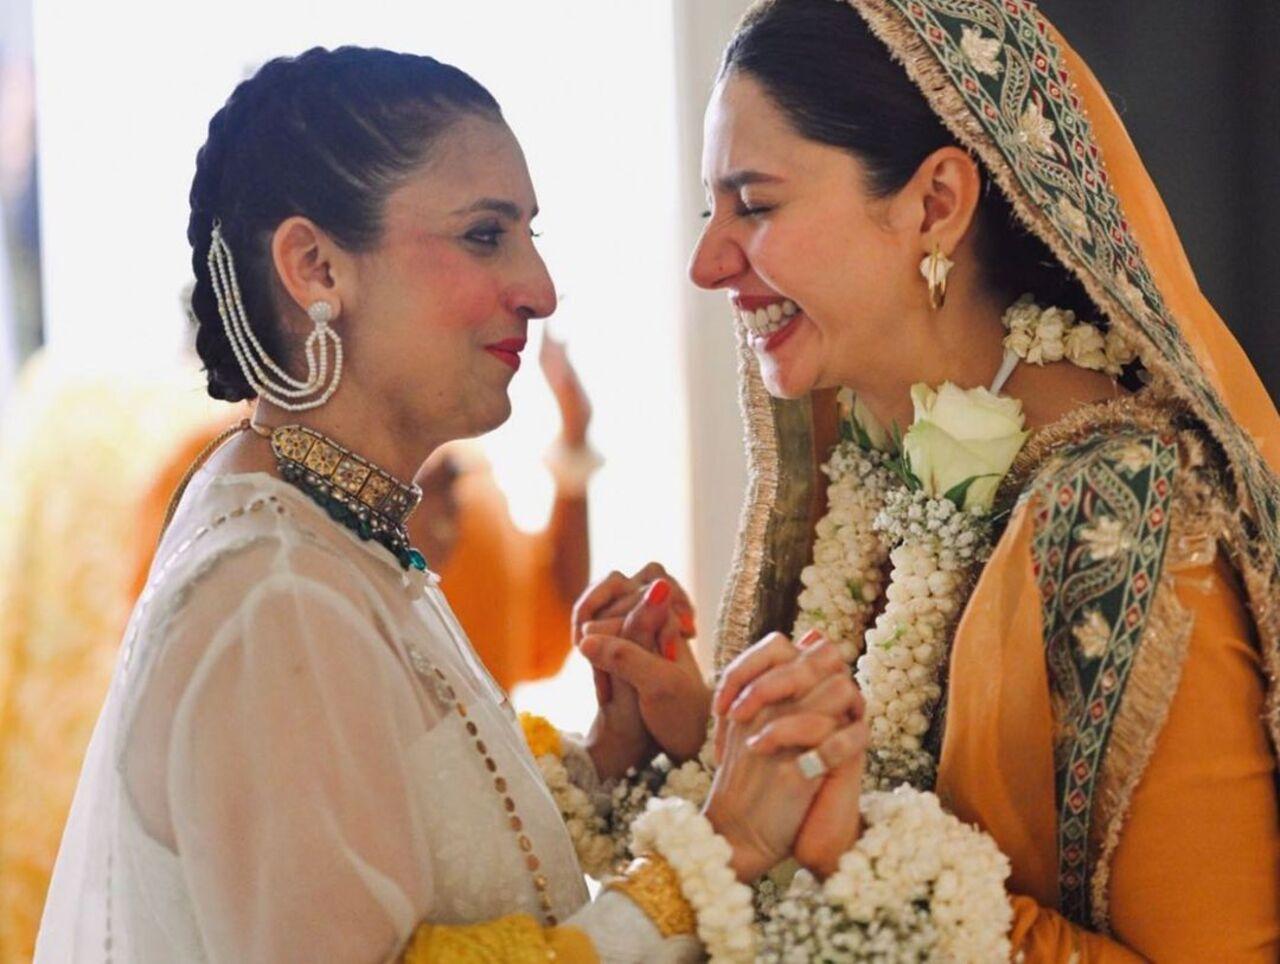 Mahira, in her posts on Instagram, credited her friends, for making her wedding a joyous occasion